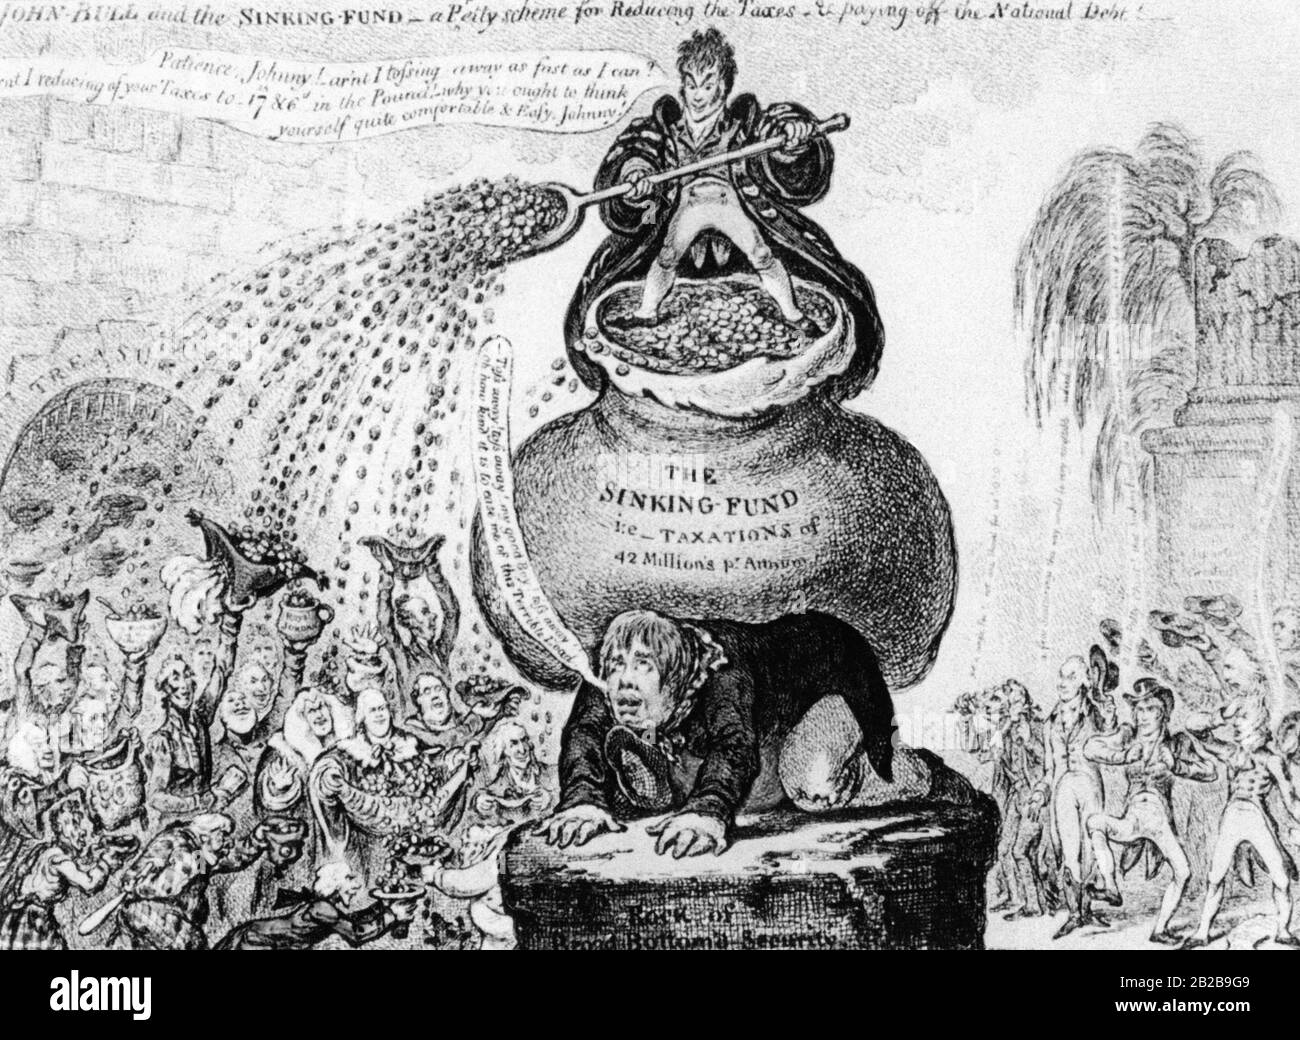 An etching by the famous cartoonist James Gillray. The Chancellor of the Exchequer, Lord Petty, takes 42 million pounds in tax payments from the English symbolic figure John Bull. Lord Petty gives most of it to the powerful and privileged. Lord Petty had presented a financial plan, on the basis of which taxes were to be reduced for the higher incomes. Stock Photo